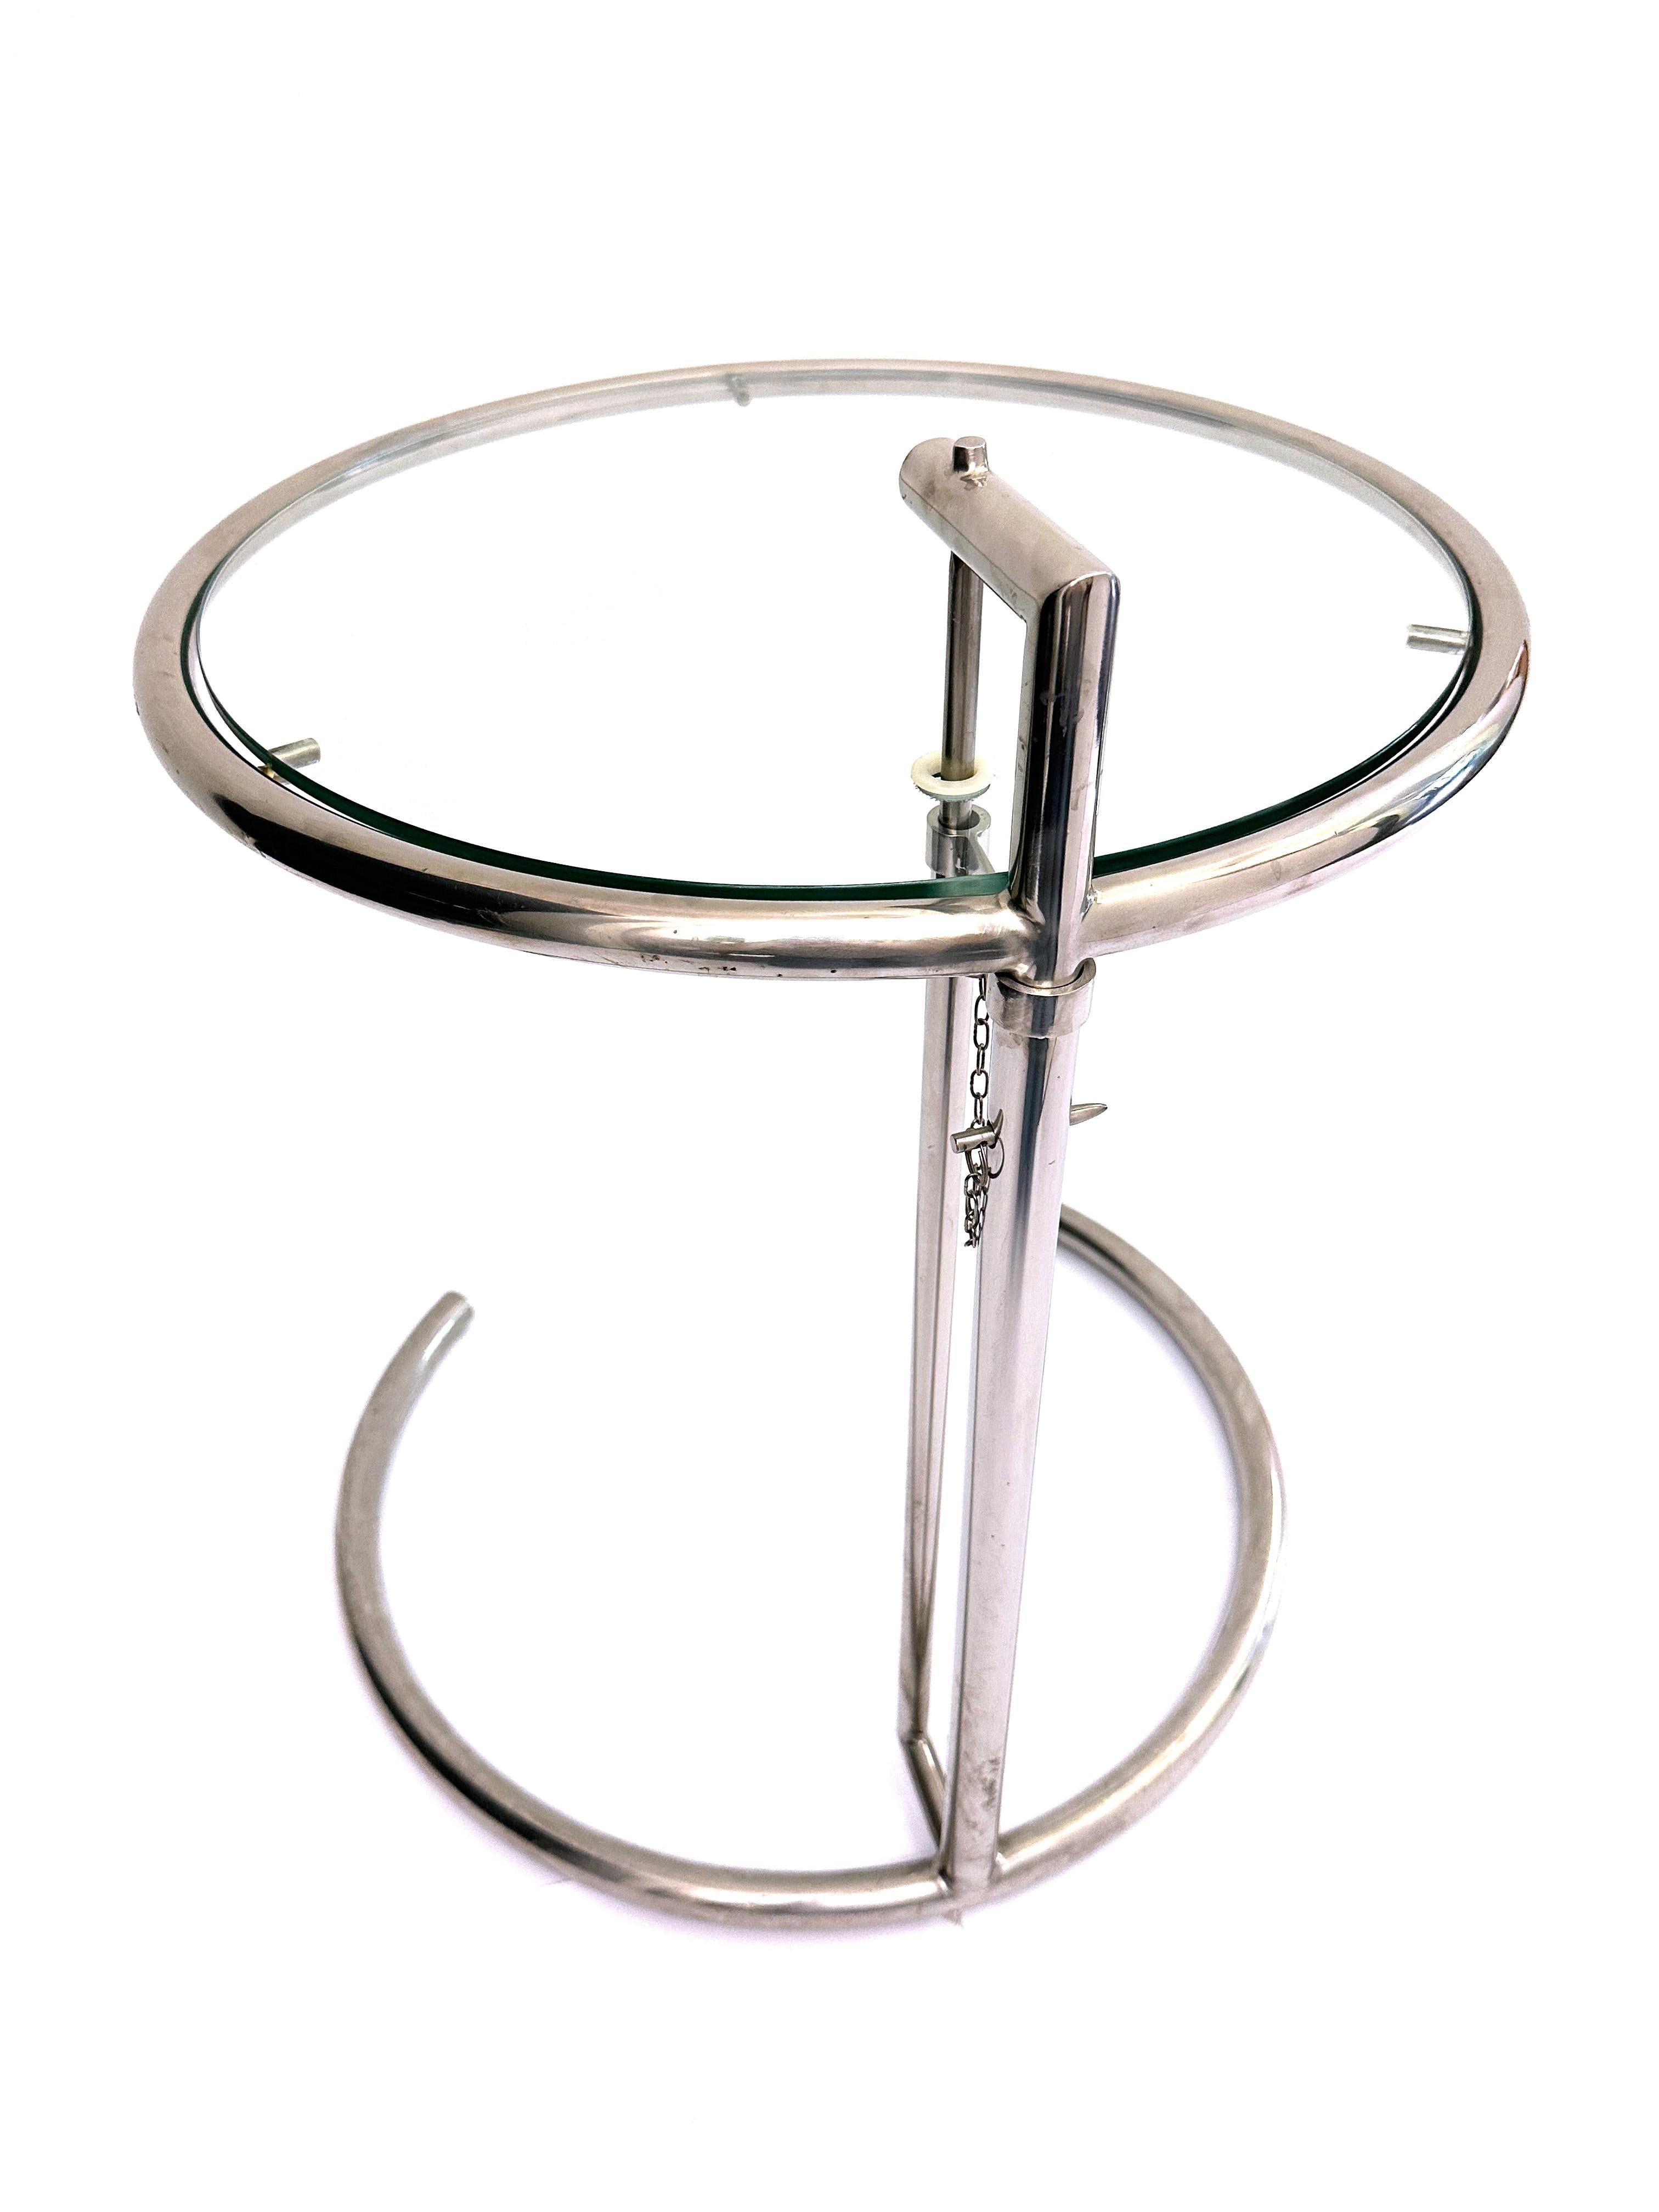 Metal Chrome and Glas Side Table Attribited to the E-1027 Designed by Eileen Gray  For Sale